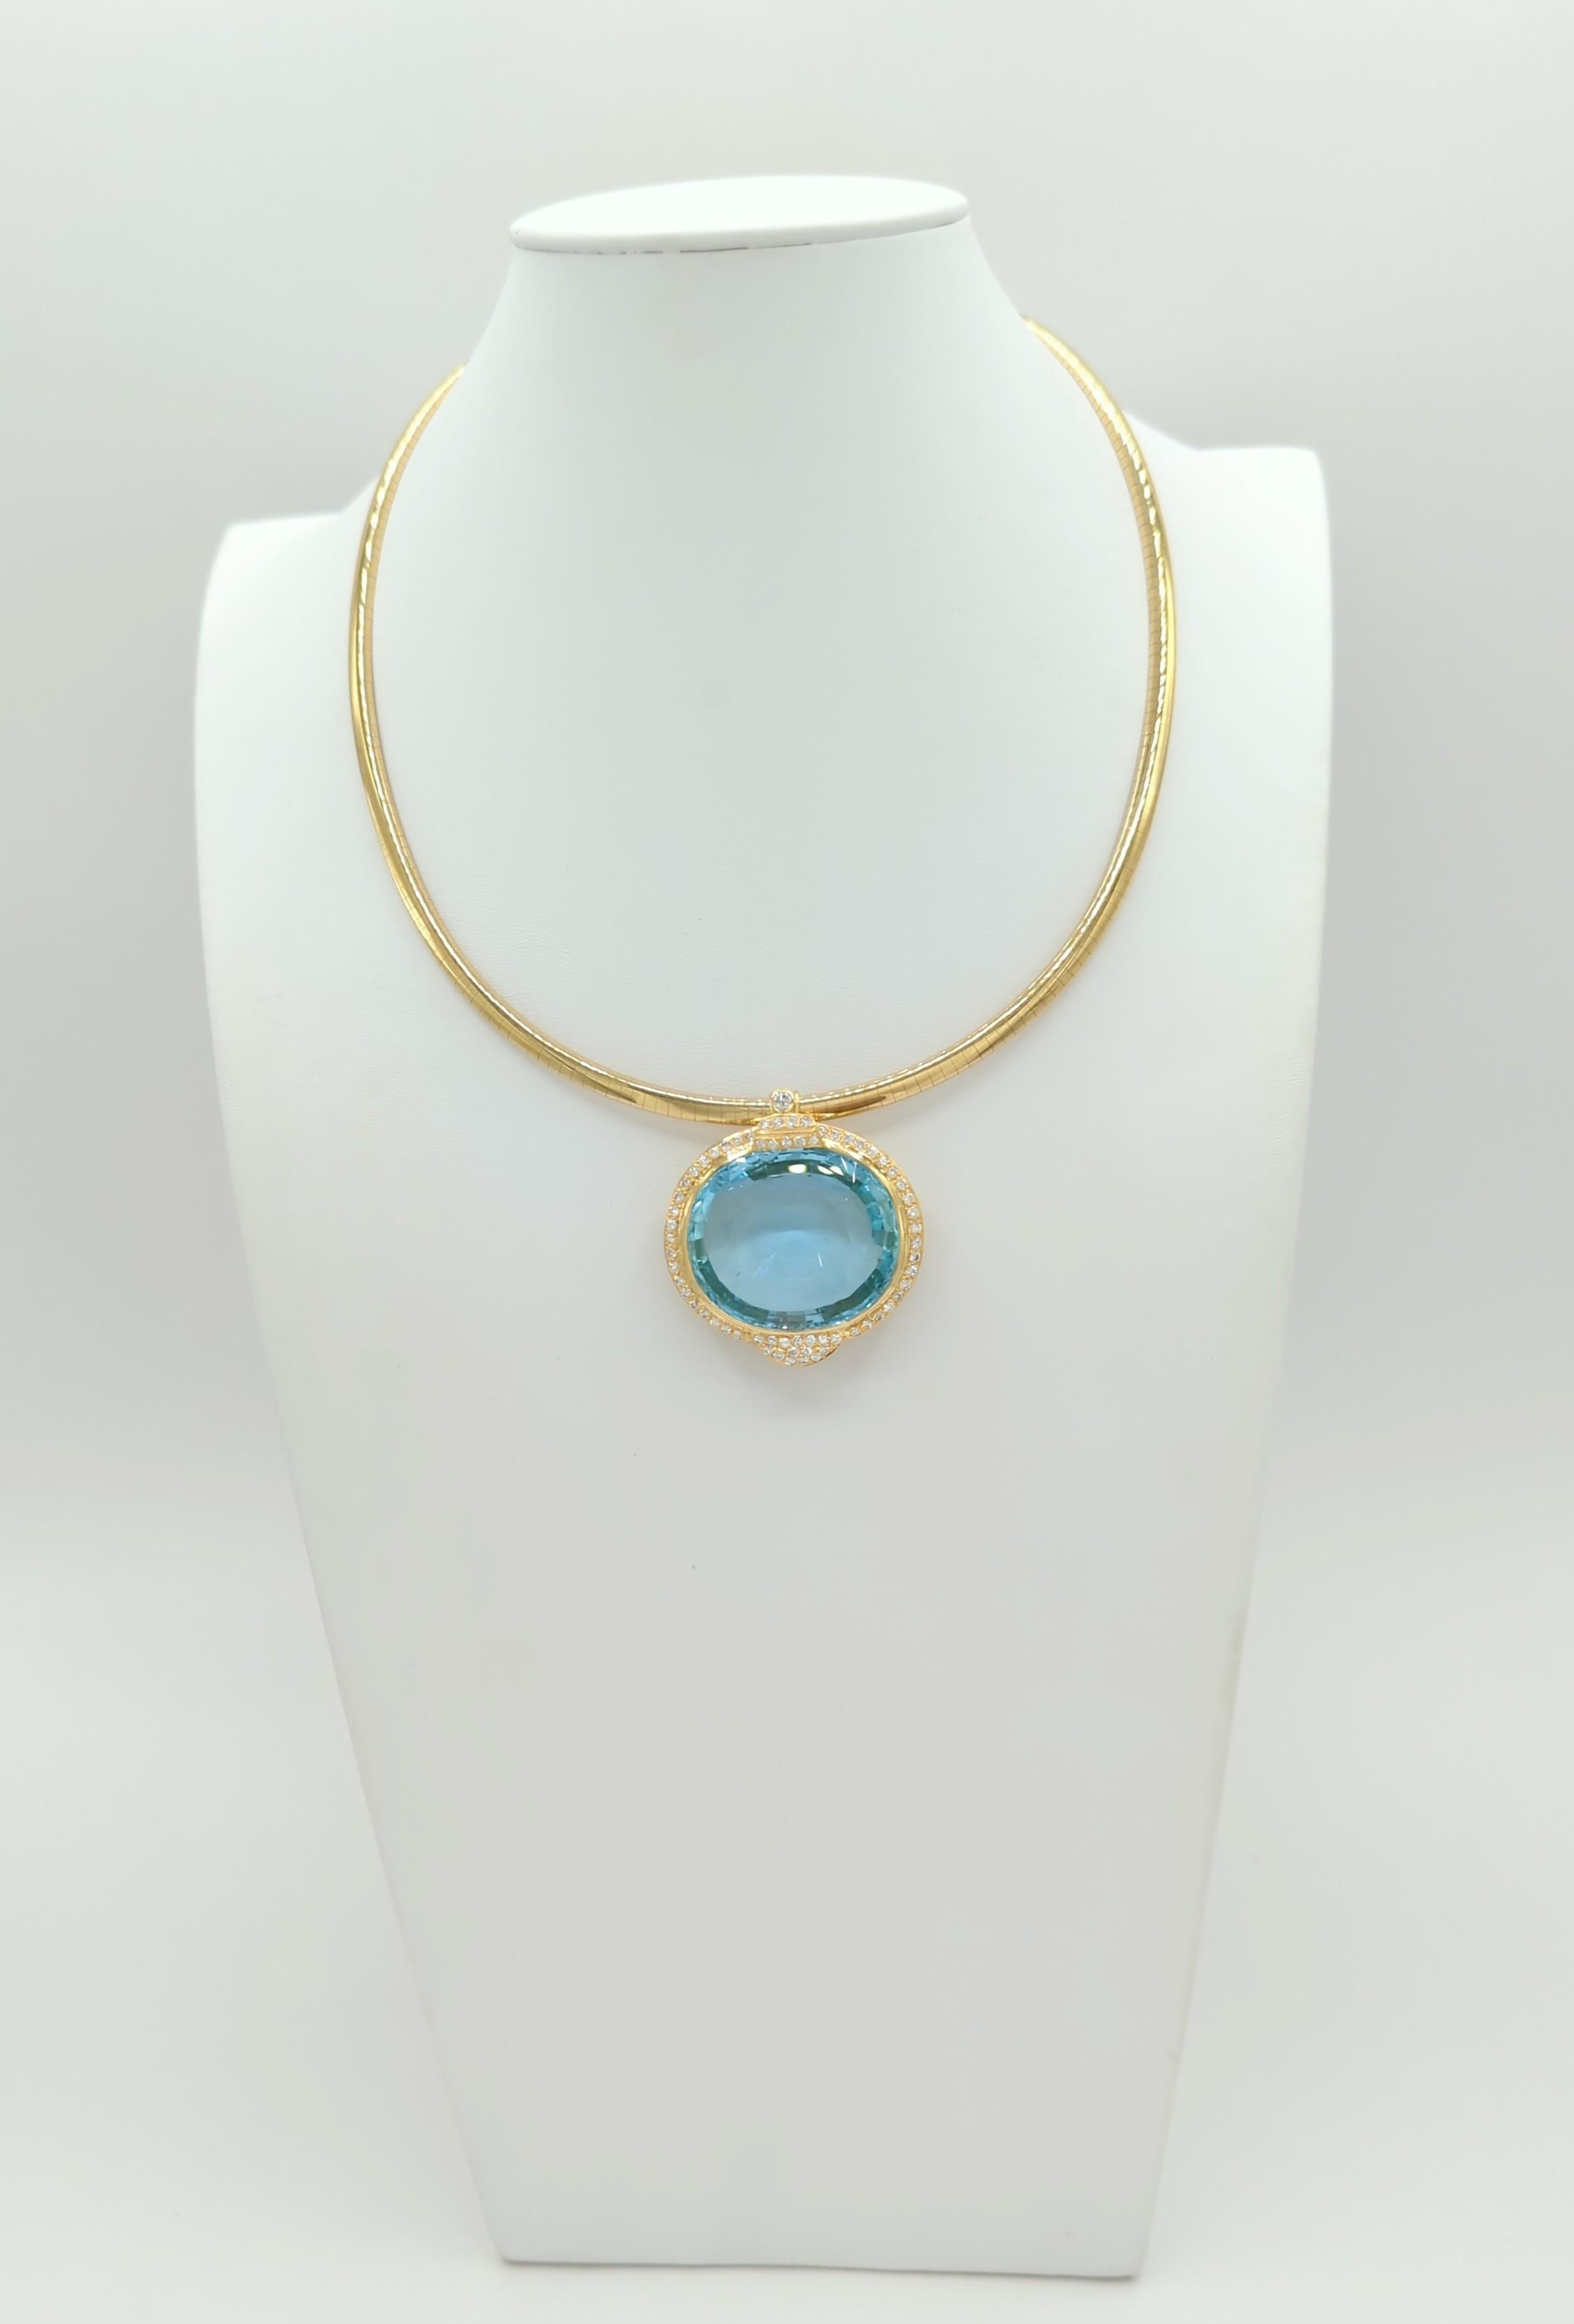 Aquamarine and White Diamond  Pendant Necklace in 14K & 18K Gold In New Condition For Sale In Los Angeles, CA